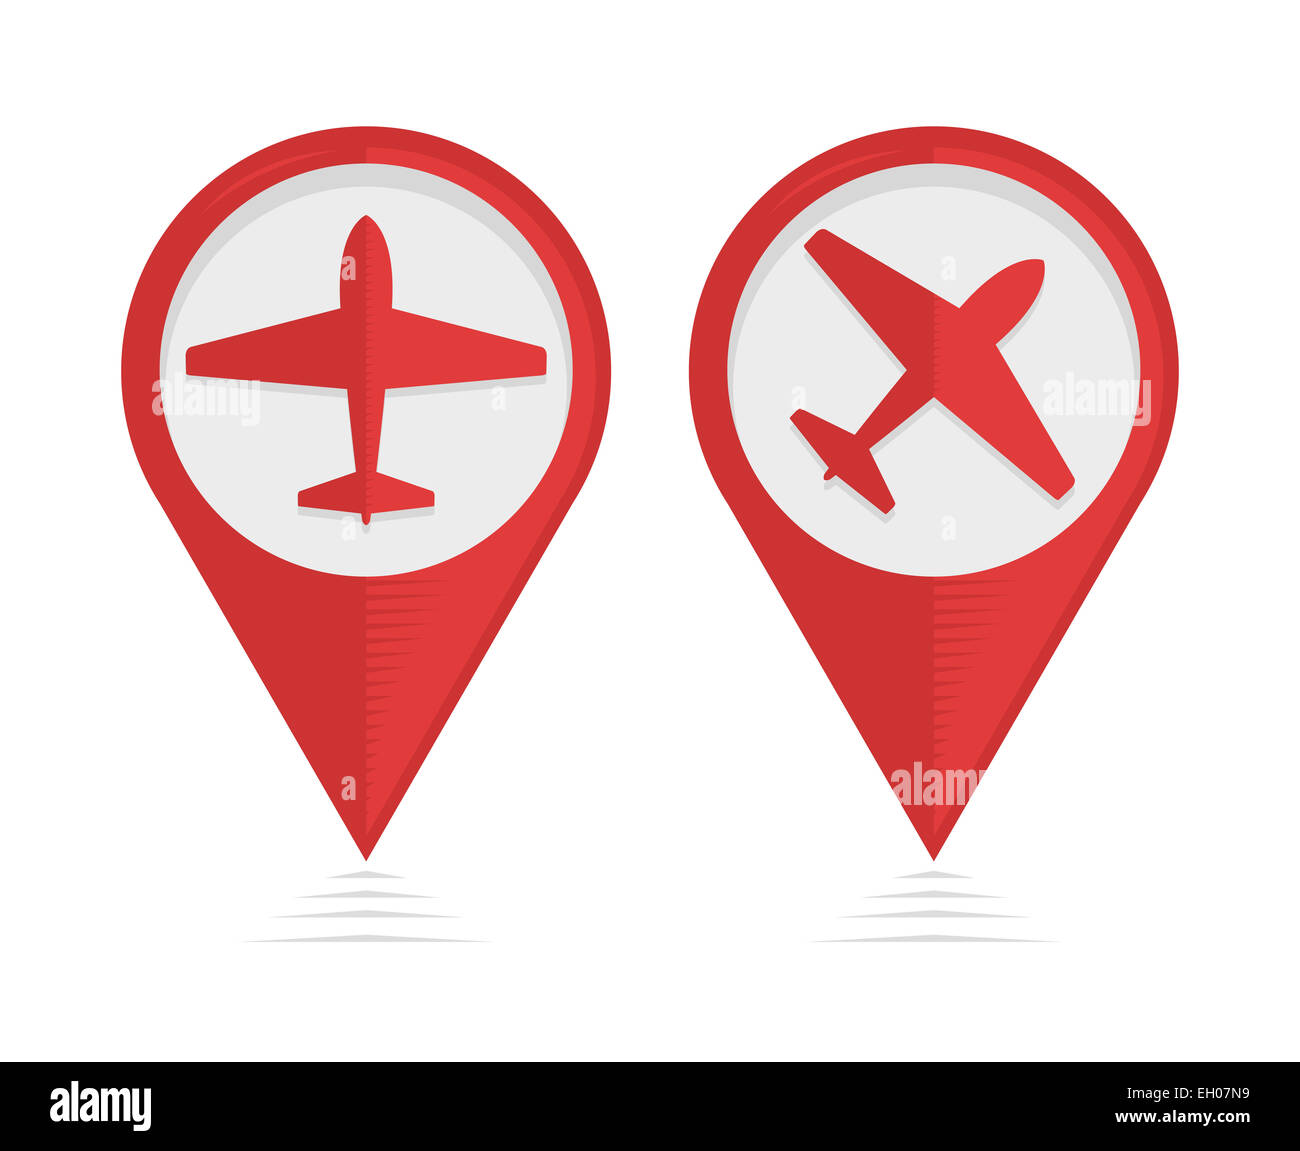 Vector pointers with airplane, travel symbol Stock Photo